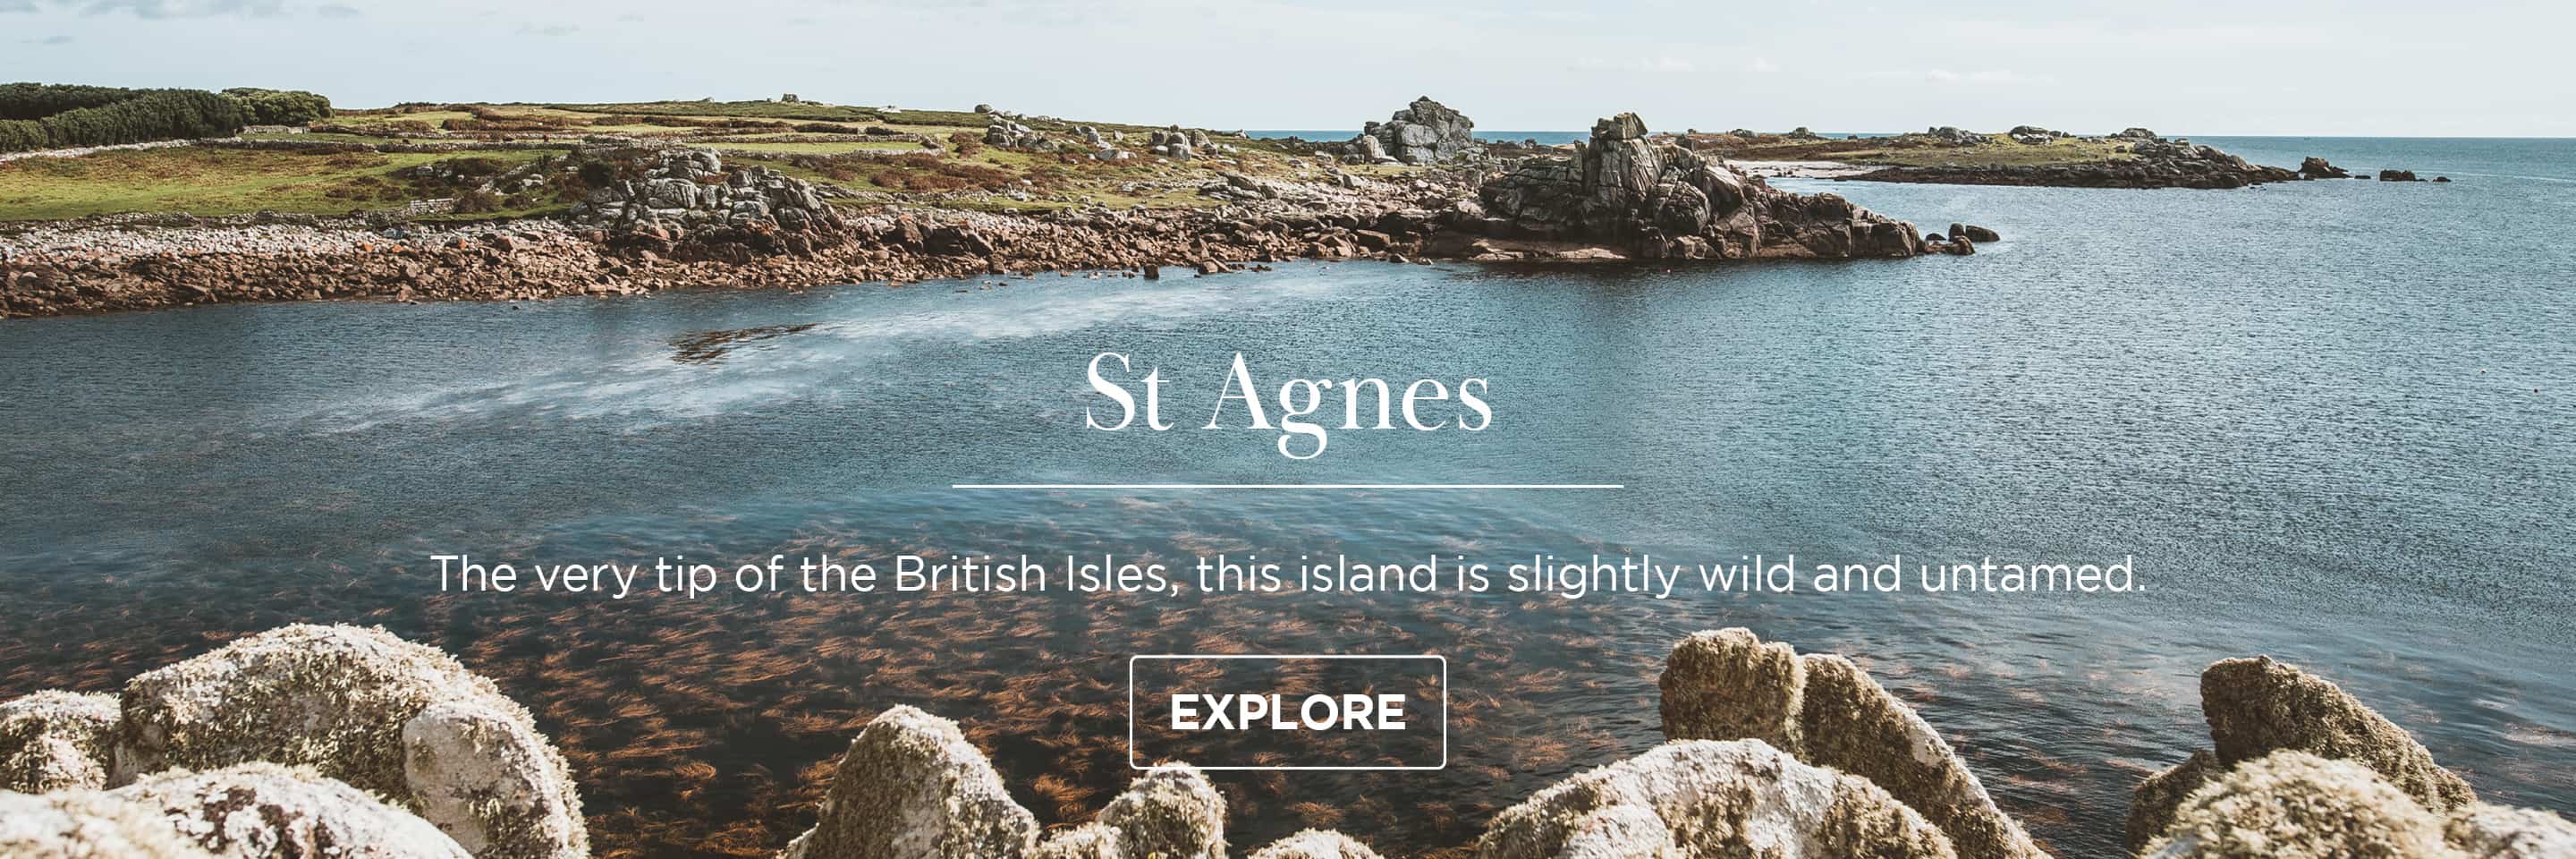 View of Porth Askin in autumn - St Agnes, Isles of Scilly